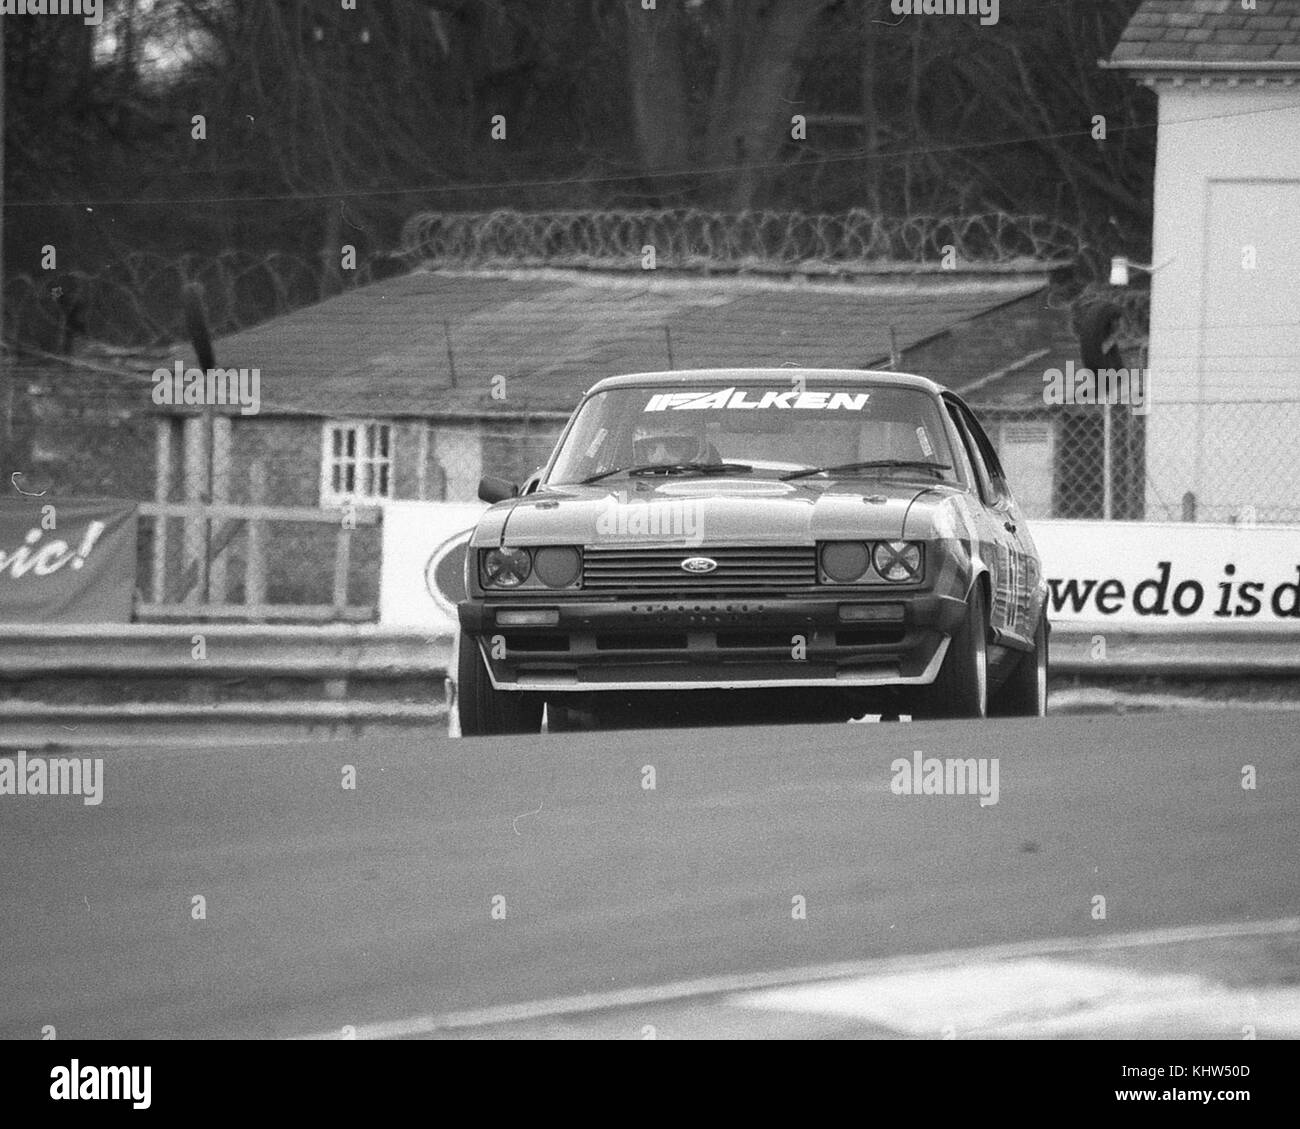 Ford Capri Saloon carin racing  action from 1992, uk motorsport images from Oulton Park in April 92 Stock Photo